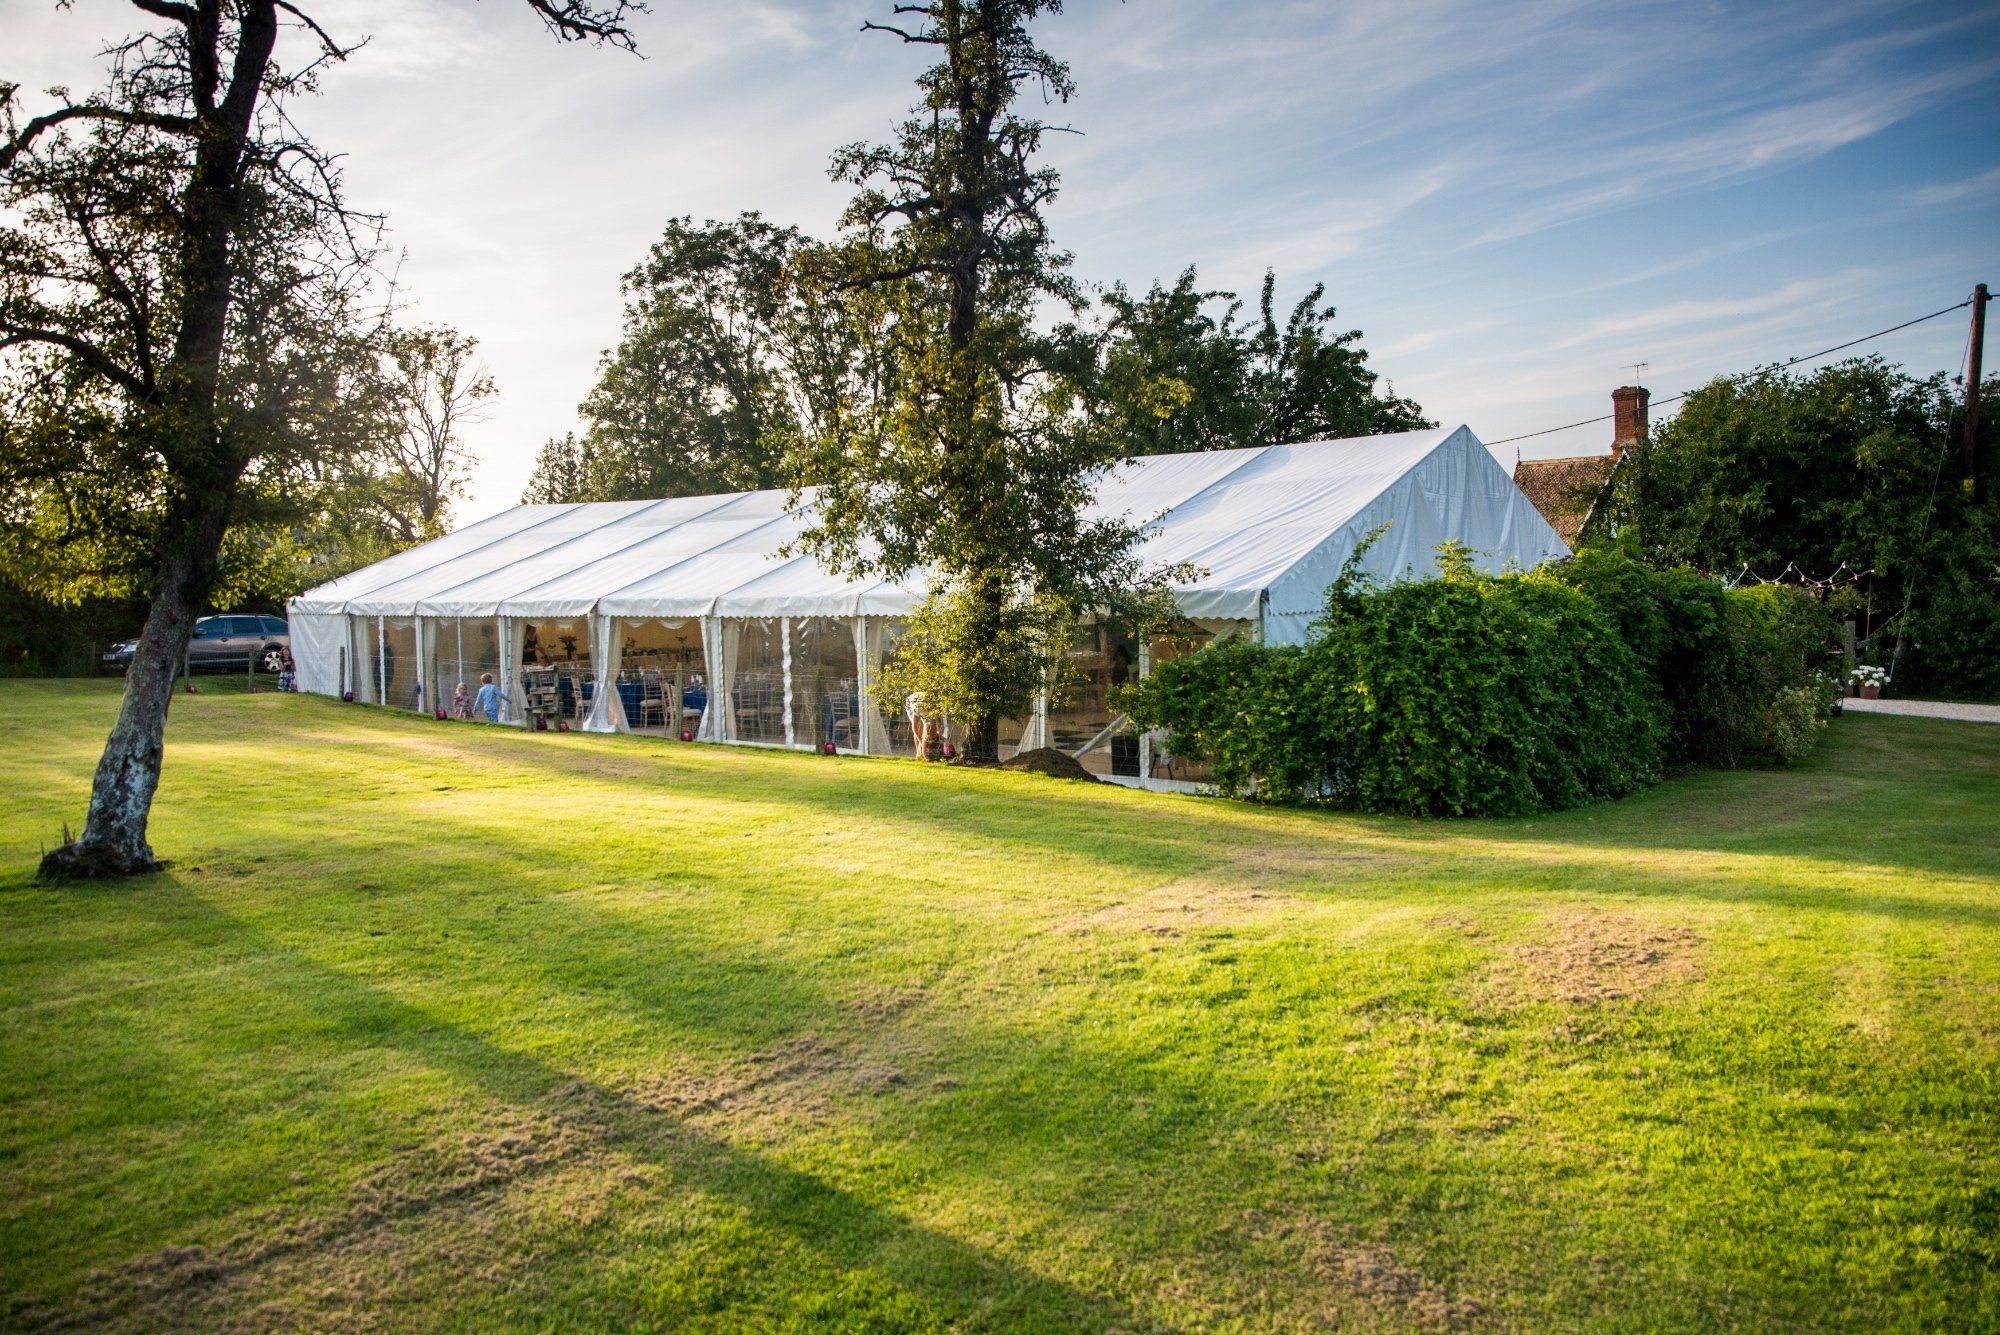 Stunning party or wedding clearspan marquee with panoramic windows